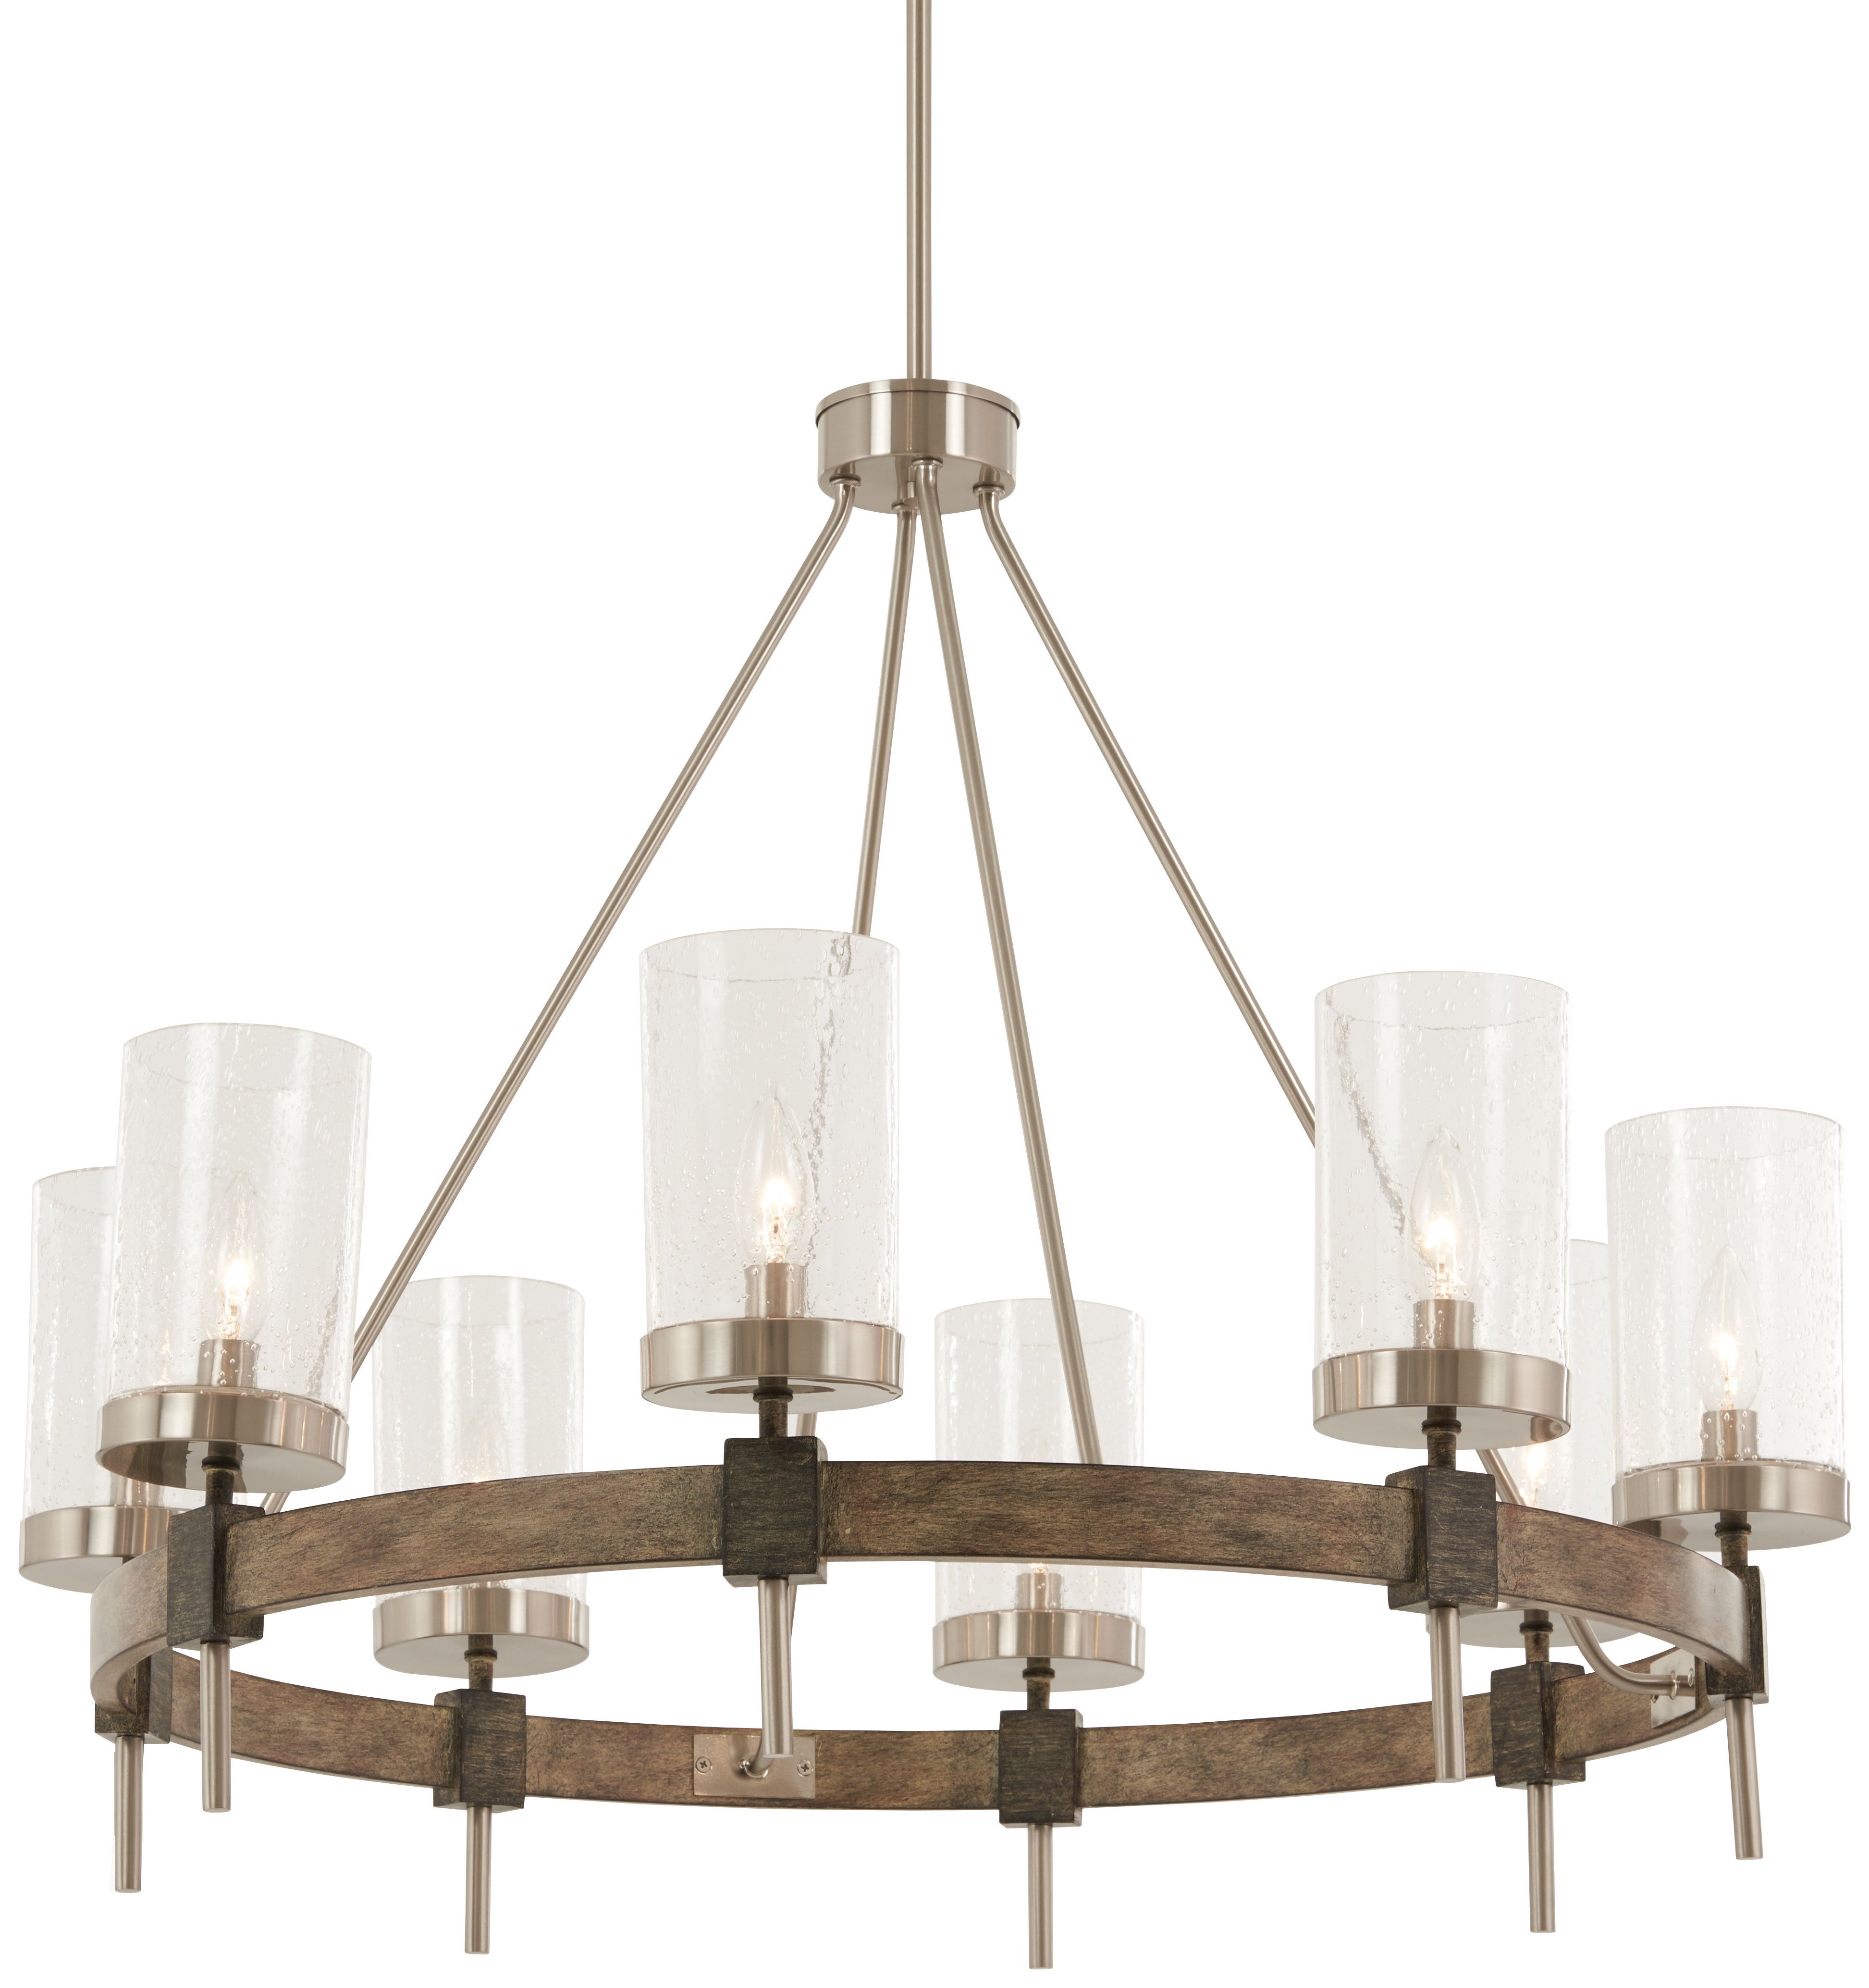 Trendy Shaylee 8 Light Candle Style Chandeliers Within Liska 8 Light Candle Style Chandelier (View 10 of 20)